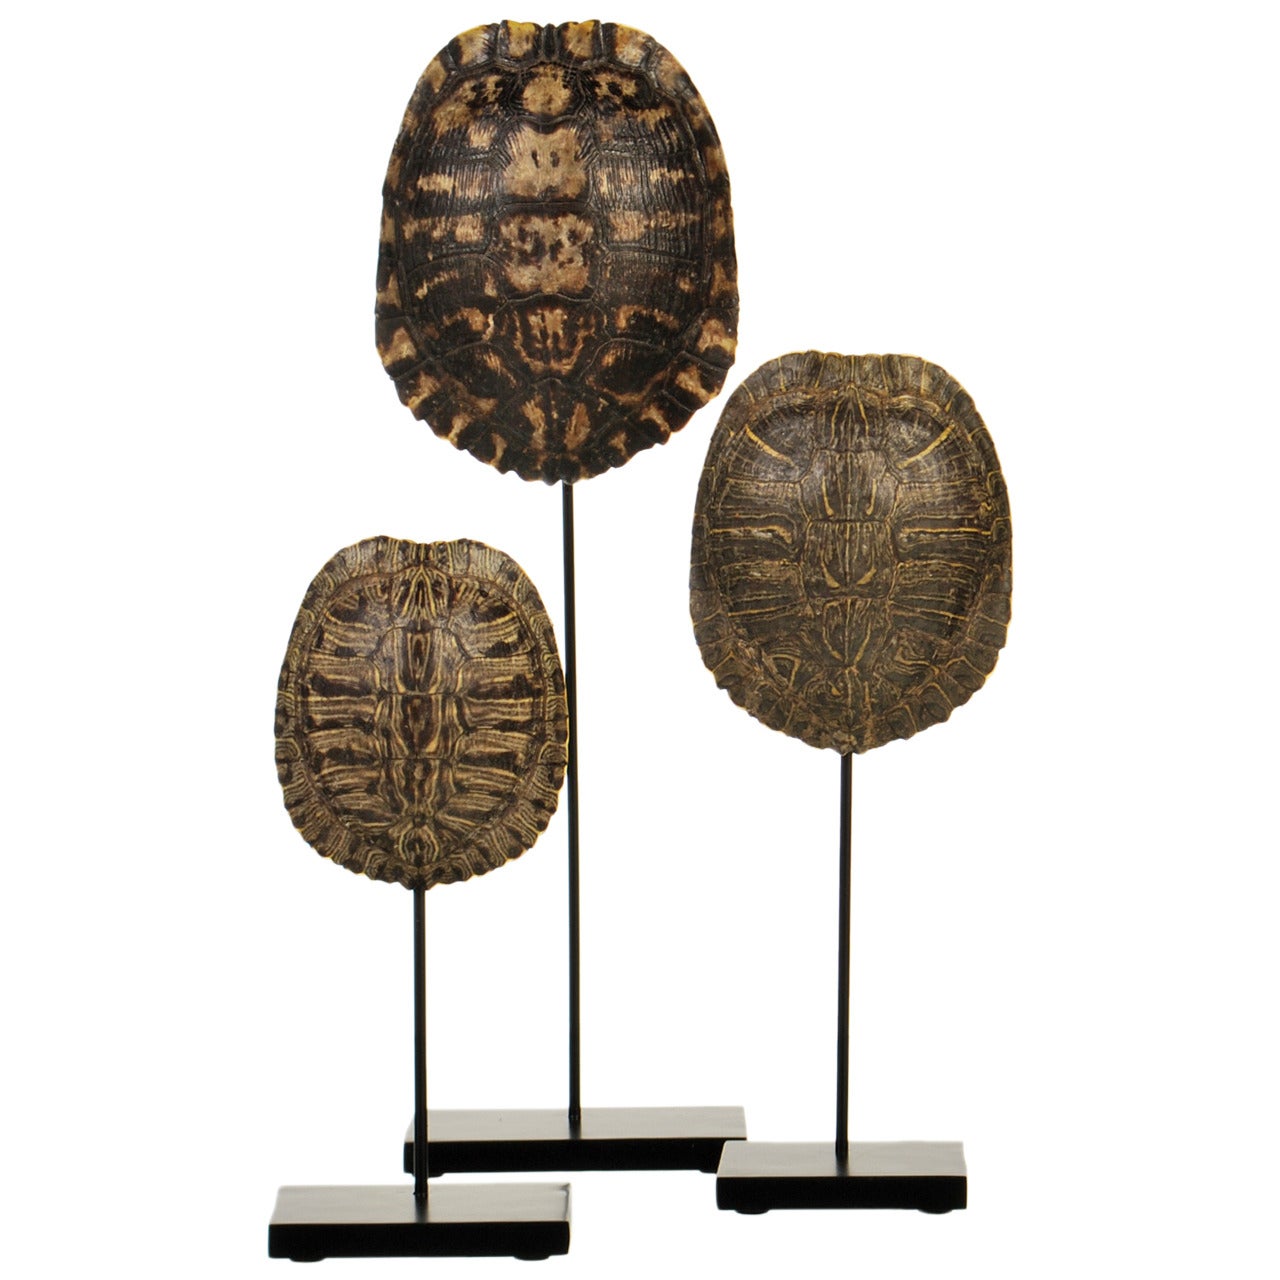 Collection of Authentic Turtle Shells on Steel Display Stands